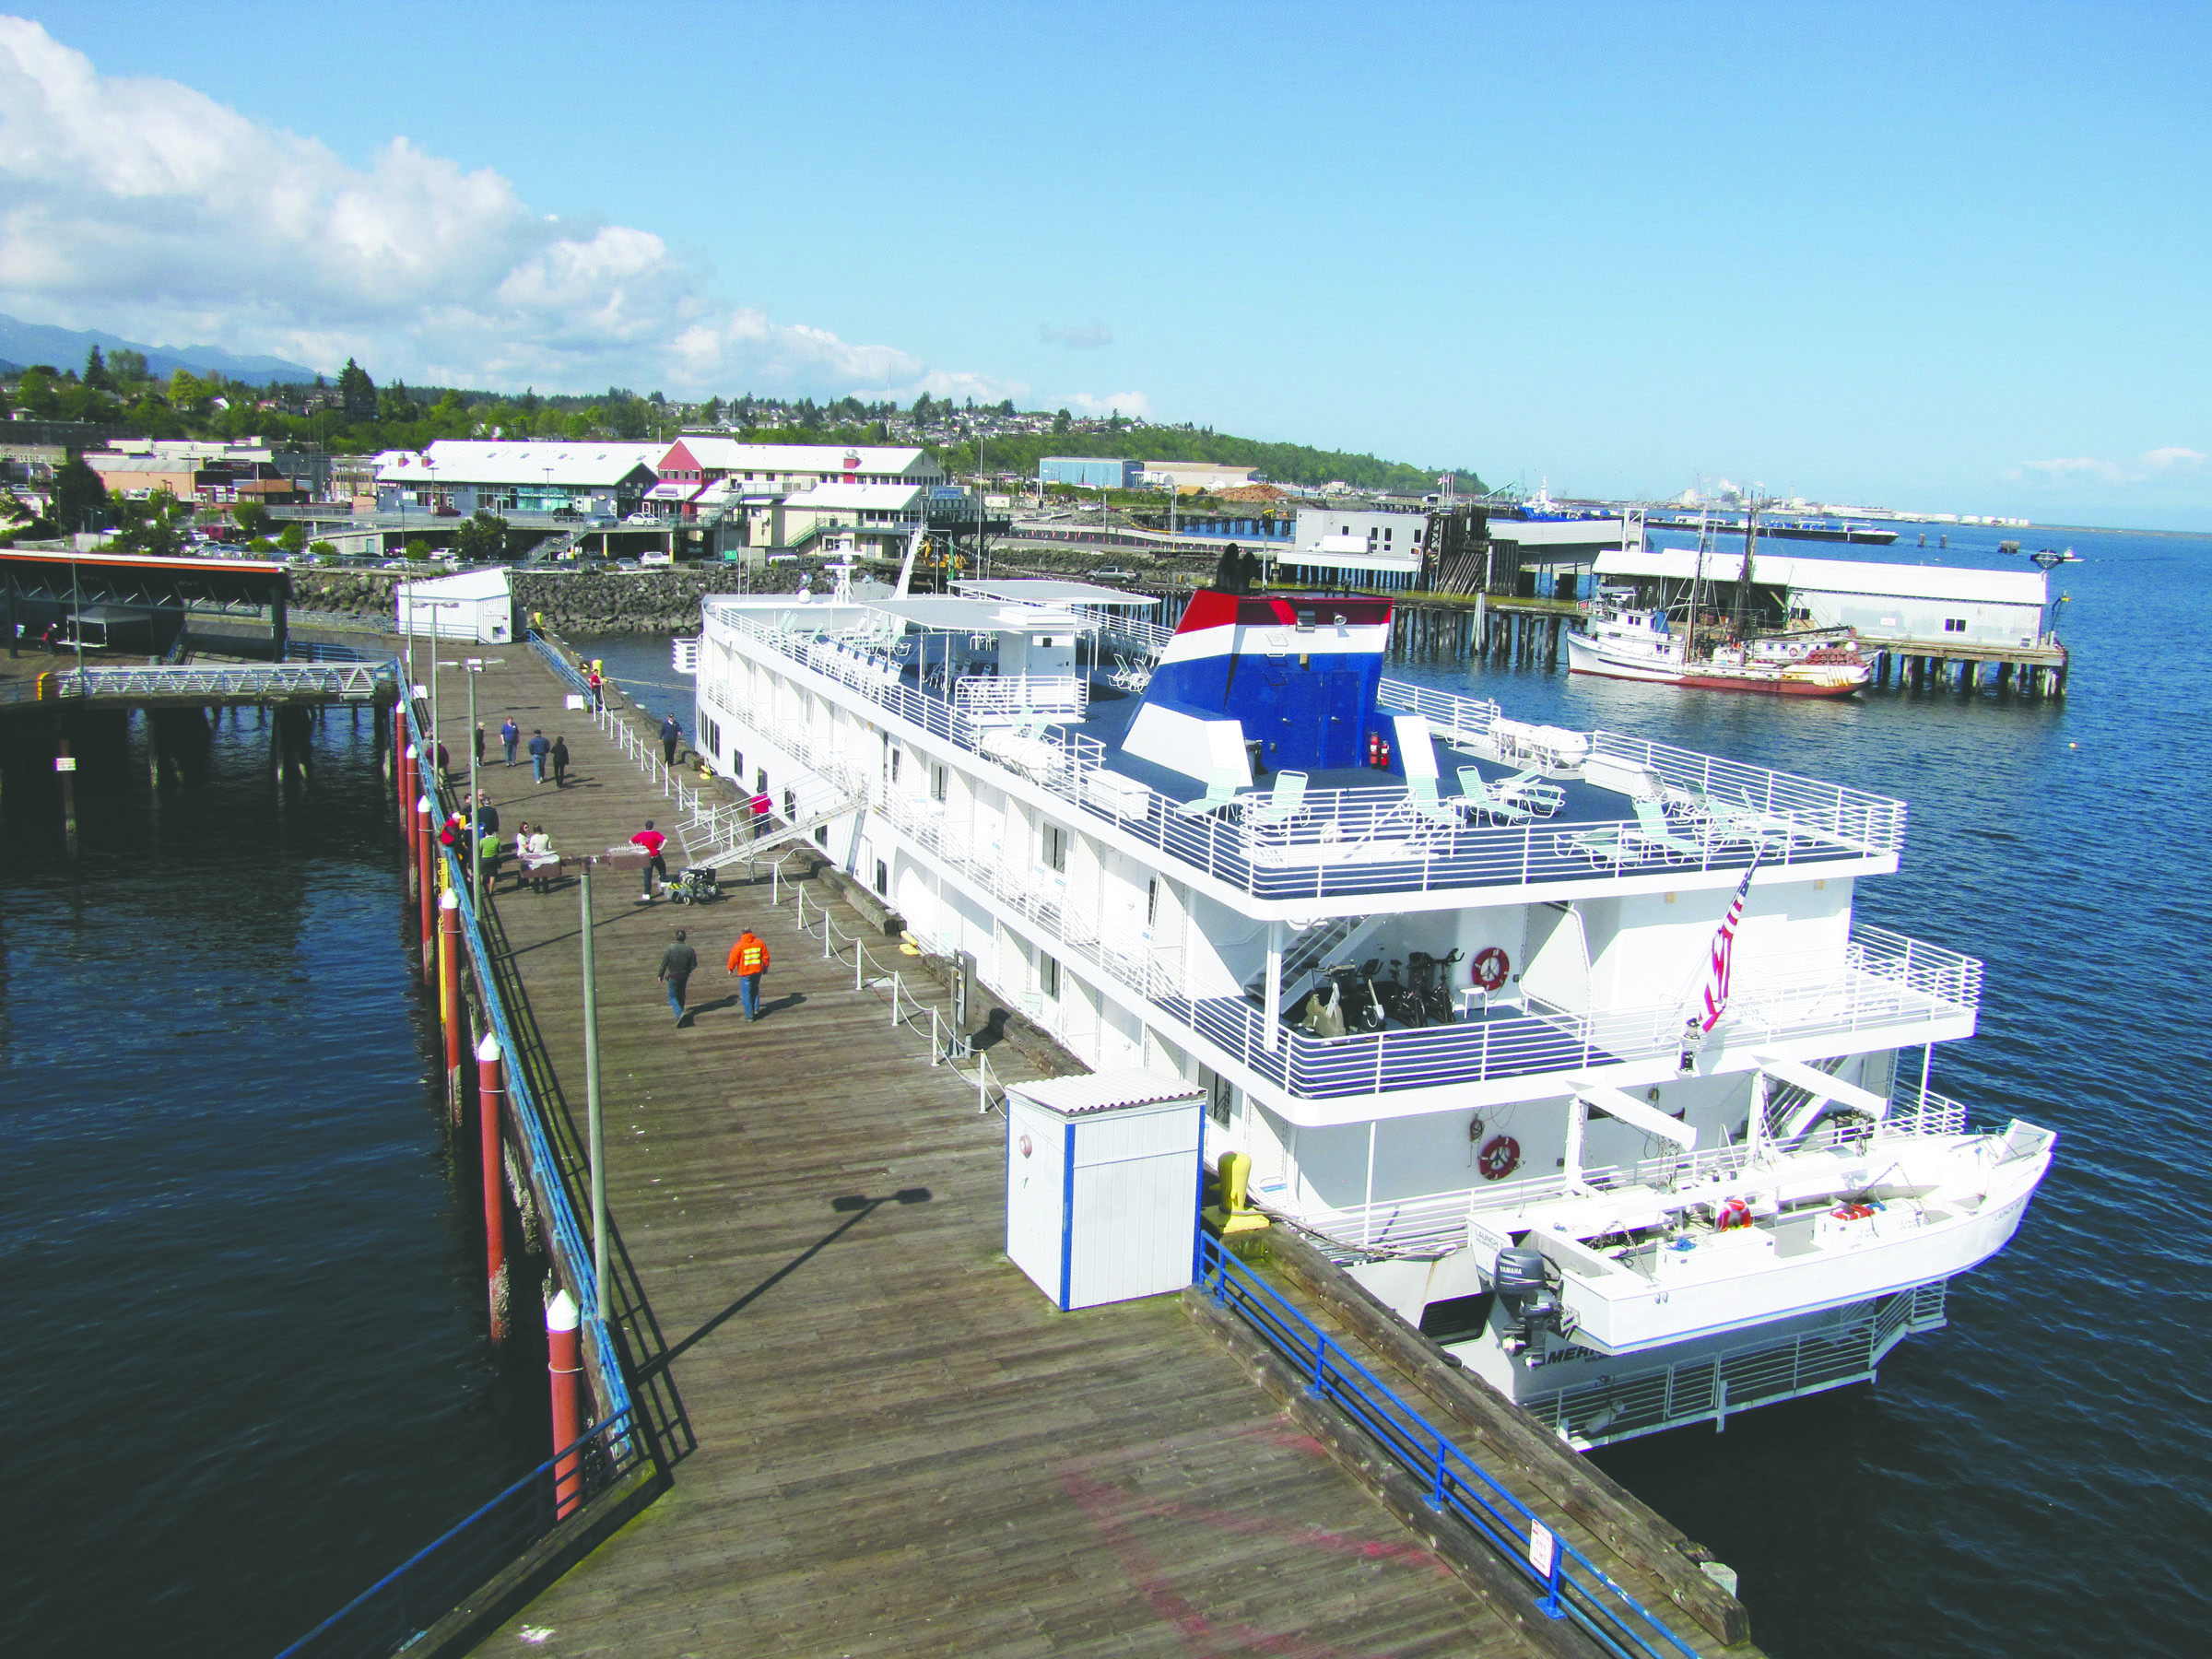 The American Spirit docked at Port Angeles City Pier today for the first of 13 visits through October on a route that also takes the small cruise ship to Port Townsend